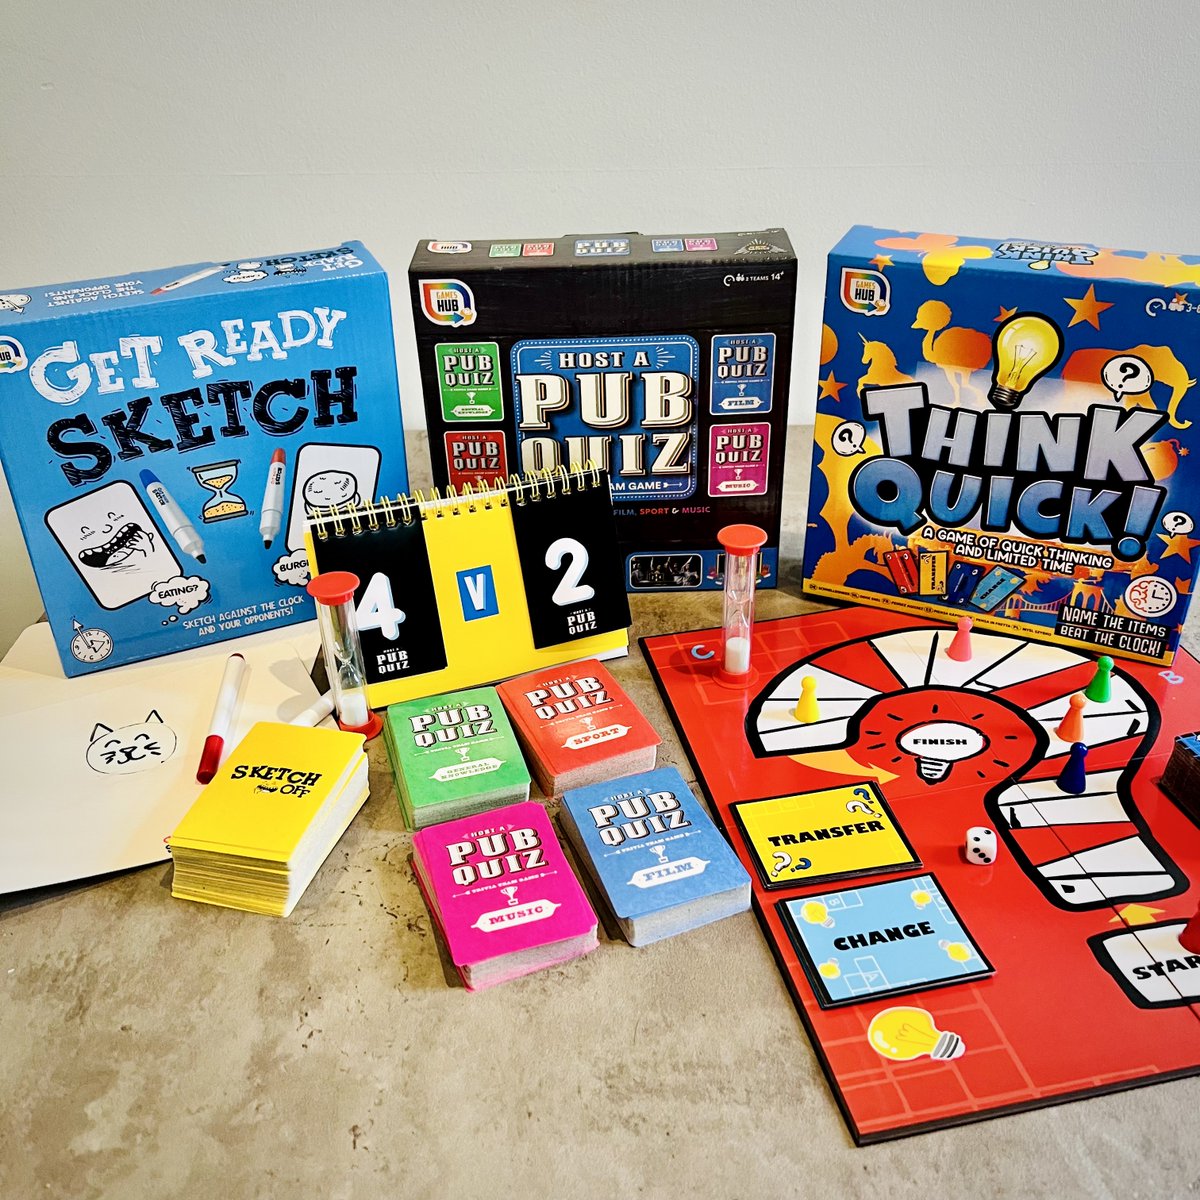 Win over your guests with after-dinner entertainment 🎲 There’s something for everyone with 3 in 1 classic games: Sketch Off, Think Quick and Pub Quiz Grab your games 👉 bit.ly/4bey9Ek #Ryman #Games #Activities